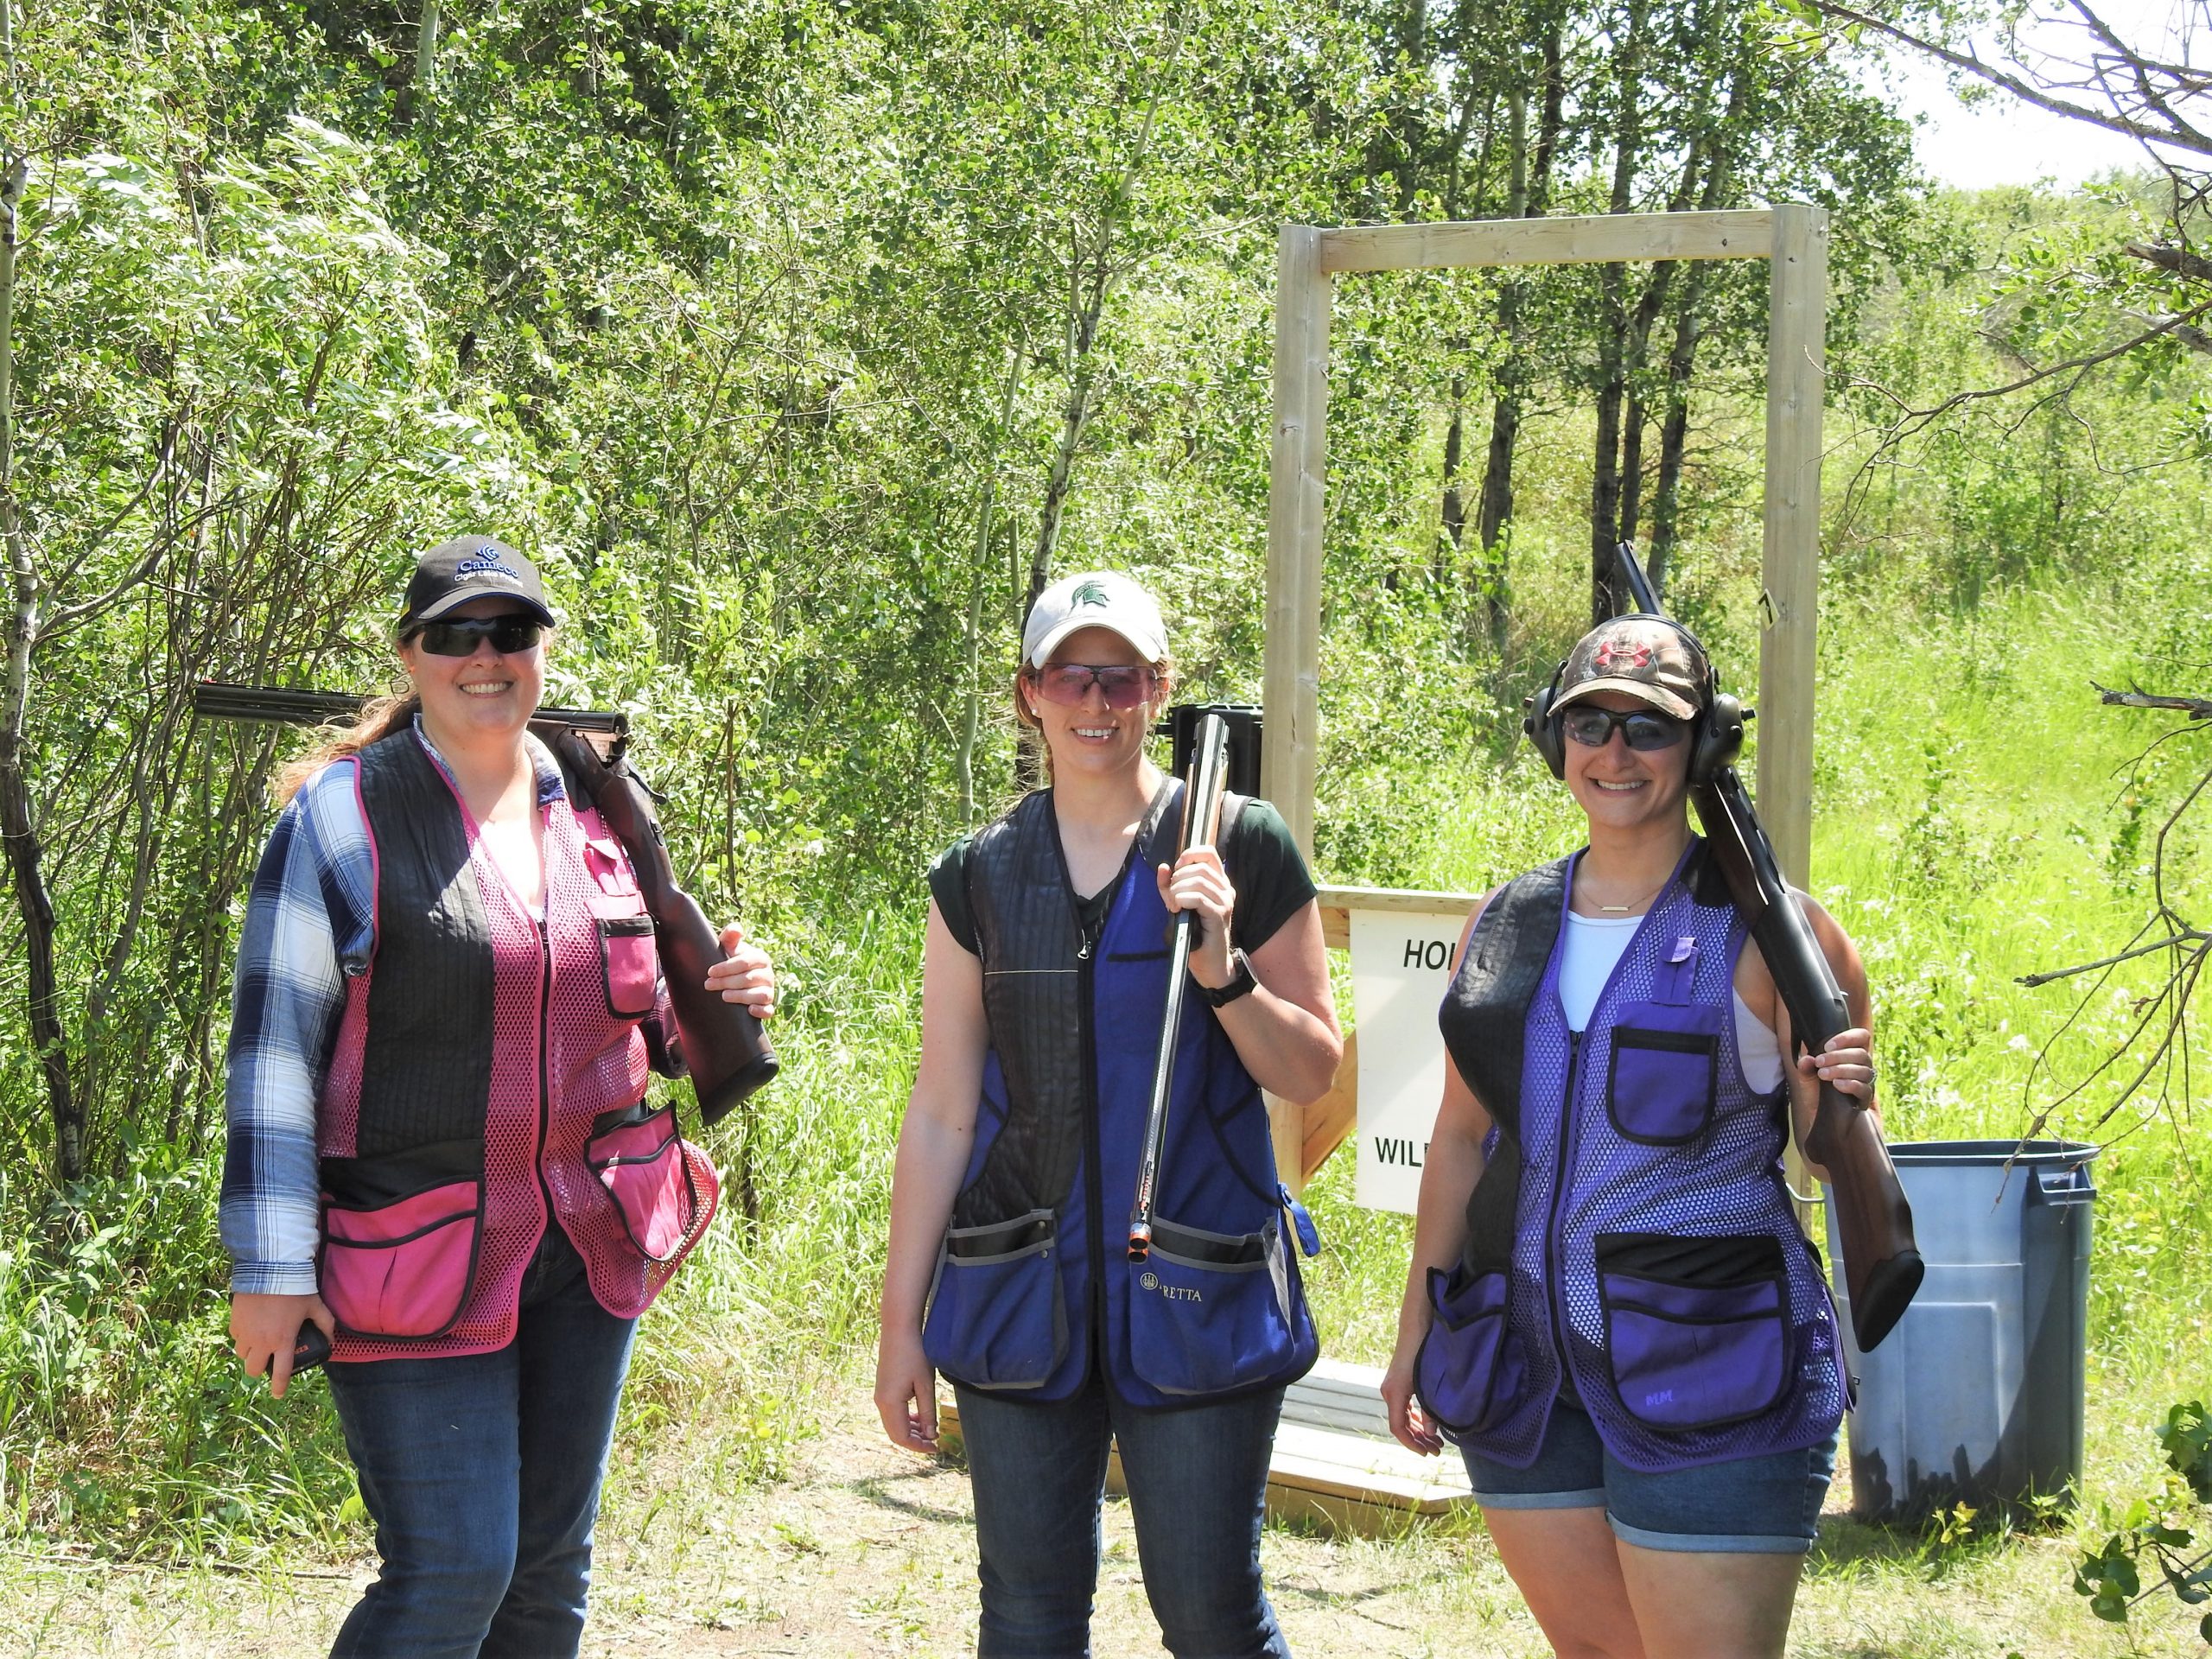 Join the SWF for the 4th Annual Sporting Clay Shoot